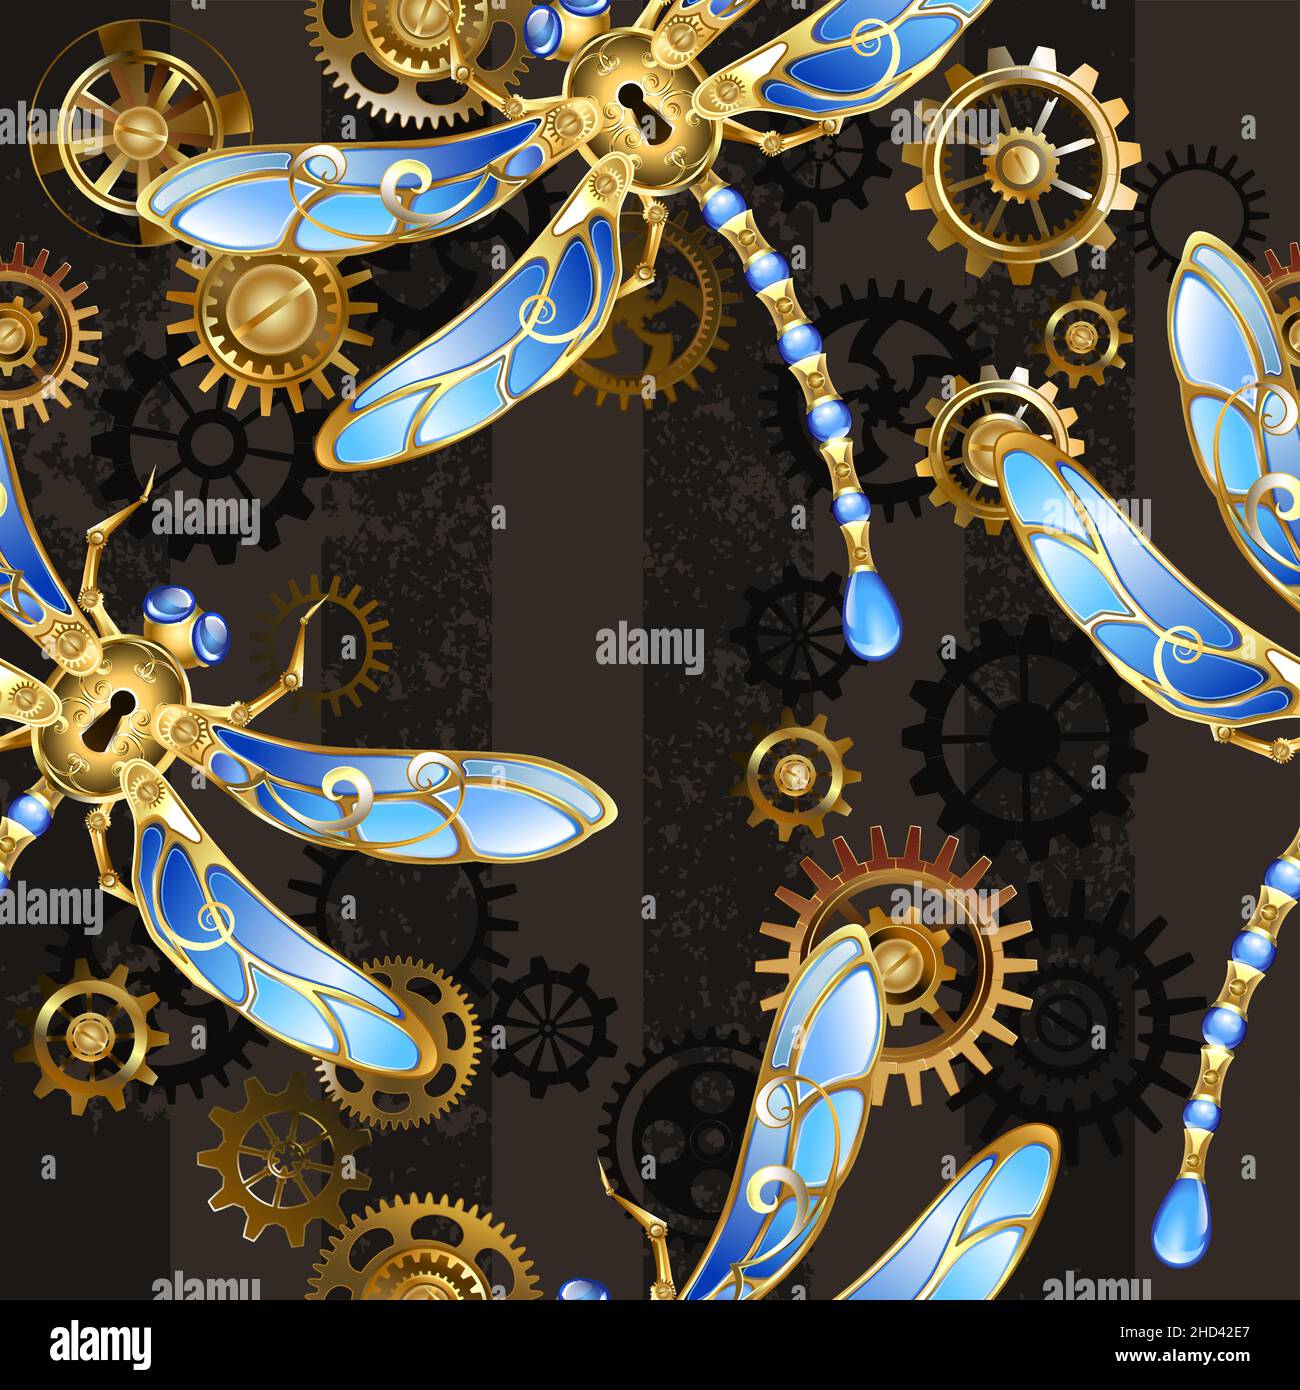 Seamless texture with mechanical, golden dragonflies, decorated with blue, glass wings with gold and brass gears on a striped, textured, brown backgro Stock Vector